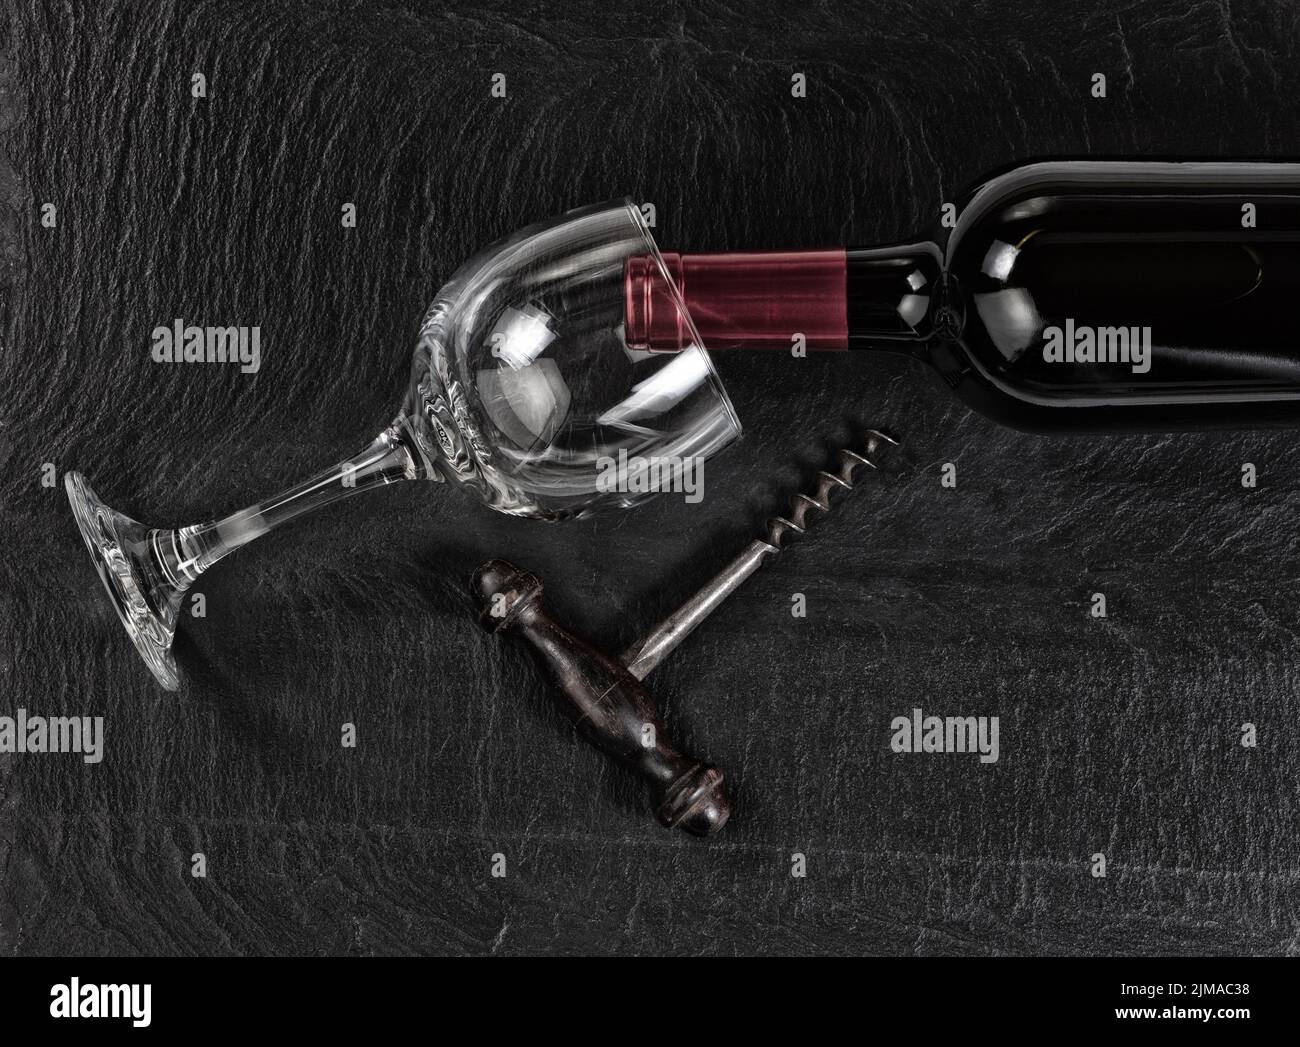 Overhead view of vintage corkscrew with red wine bottle and drinking glass on black slate background Stock Photo